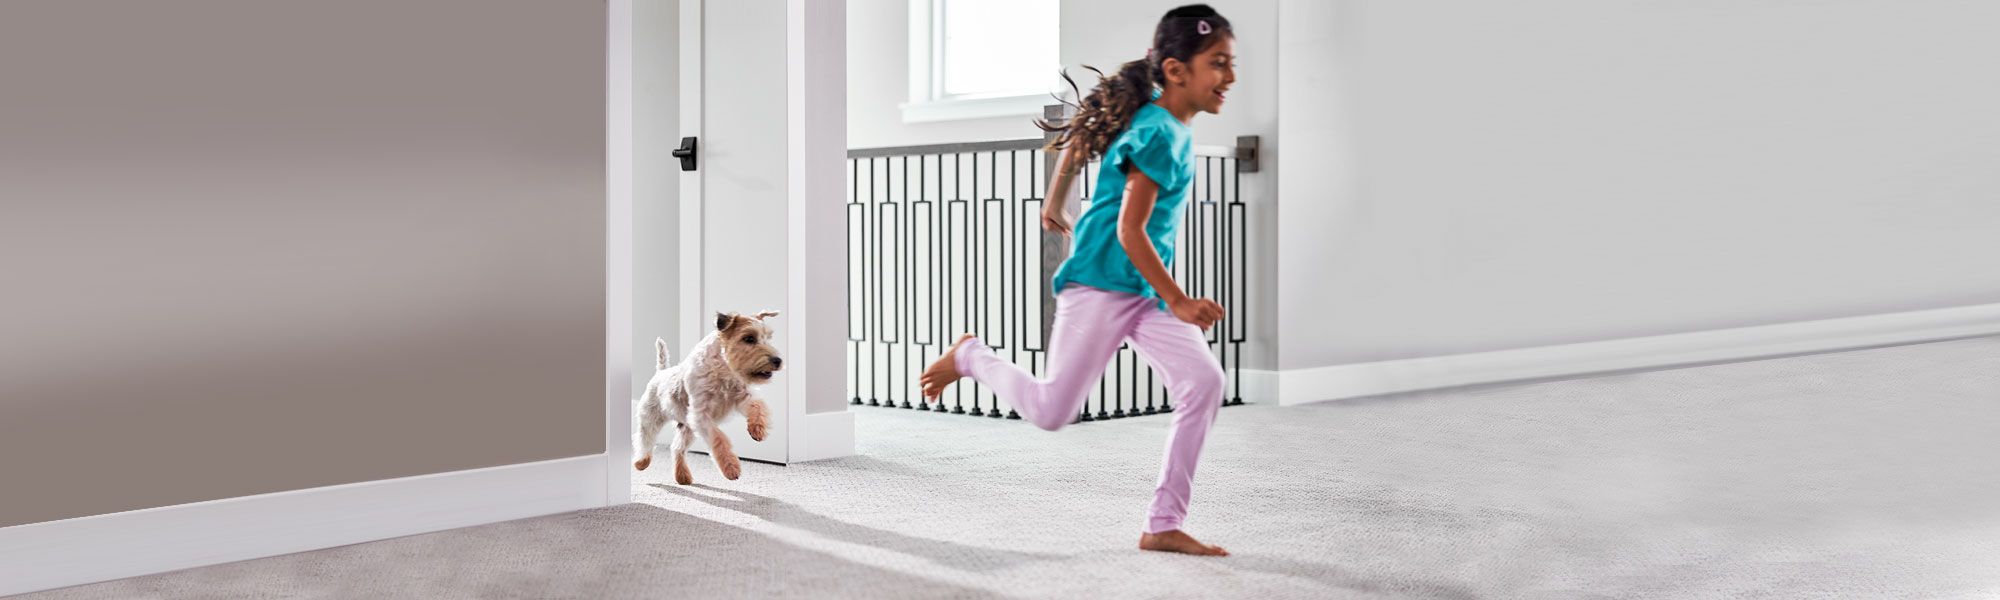 young child and puppy running through home with clean carpets